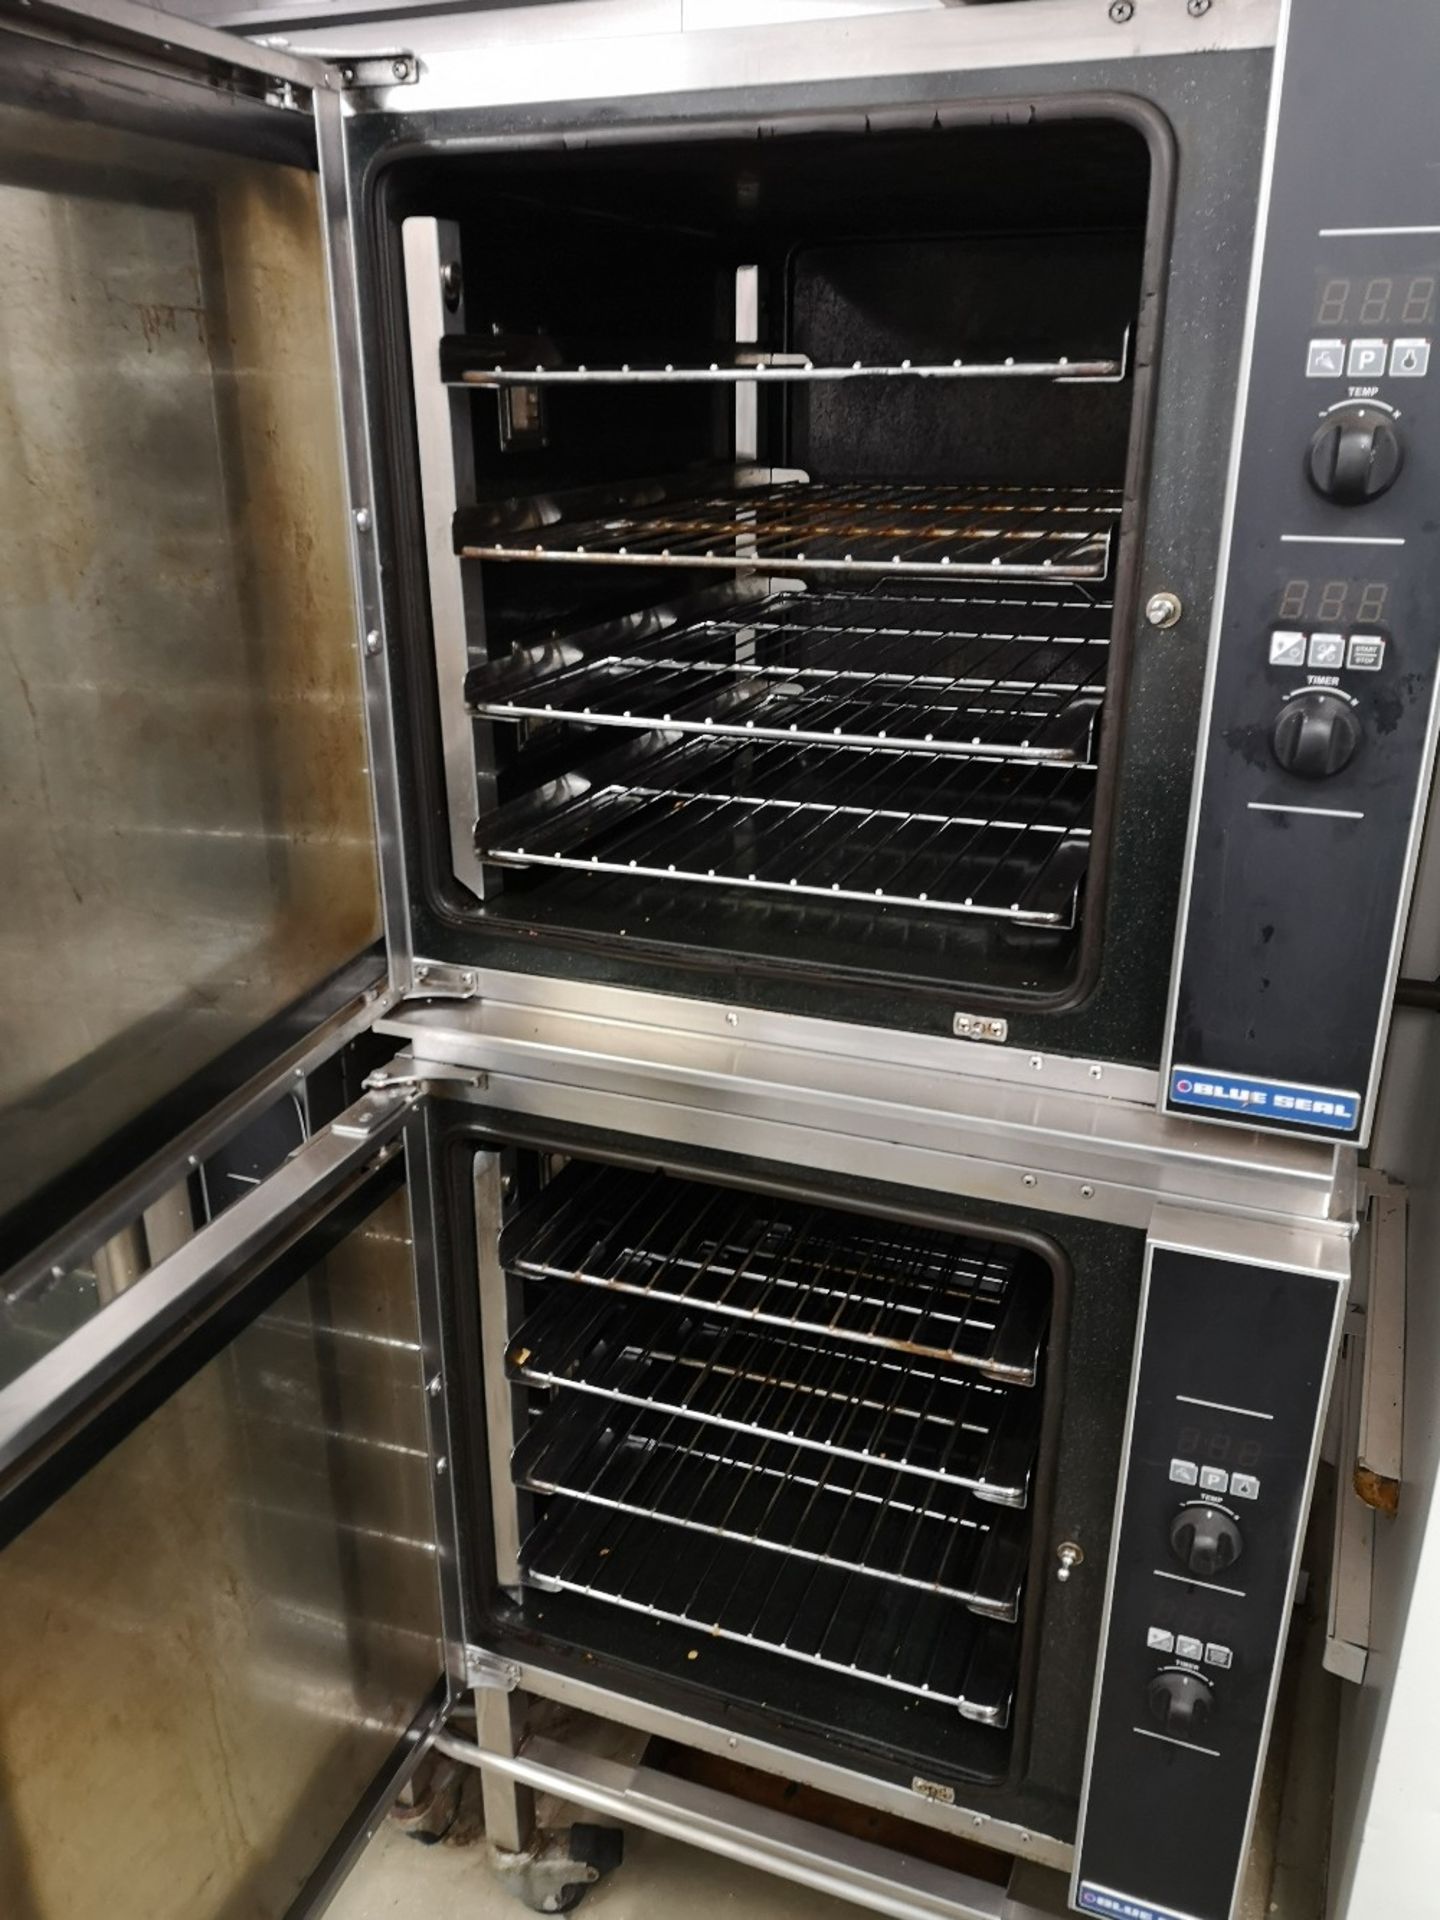 (2) Blue Seal Turbofan E32D4 166 Litre Four Tray Convection Ovens - Image 2 of 4